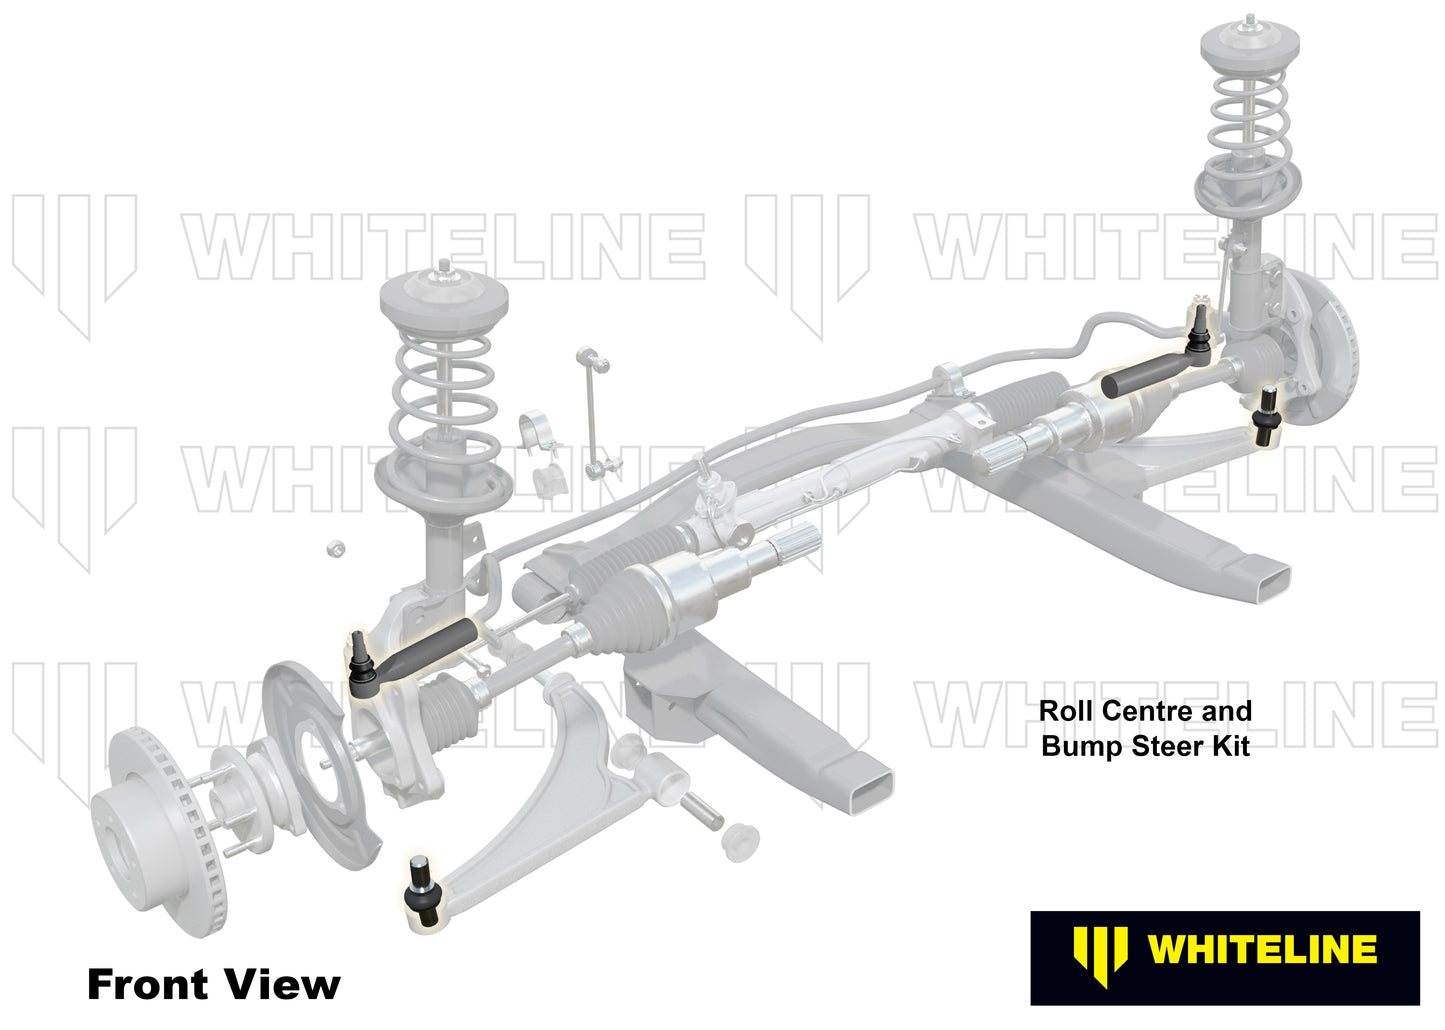 Roll centre/bump steer - correction service kit